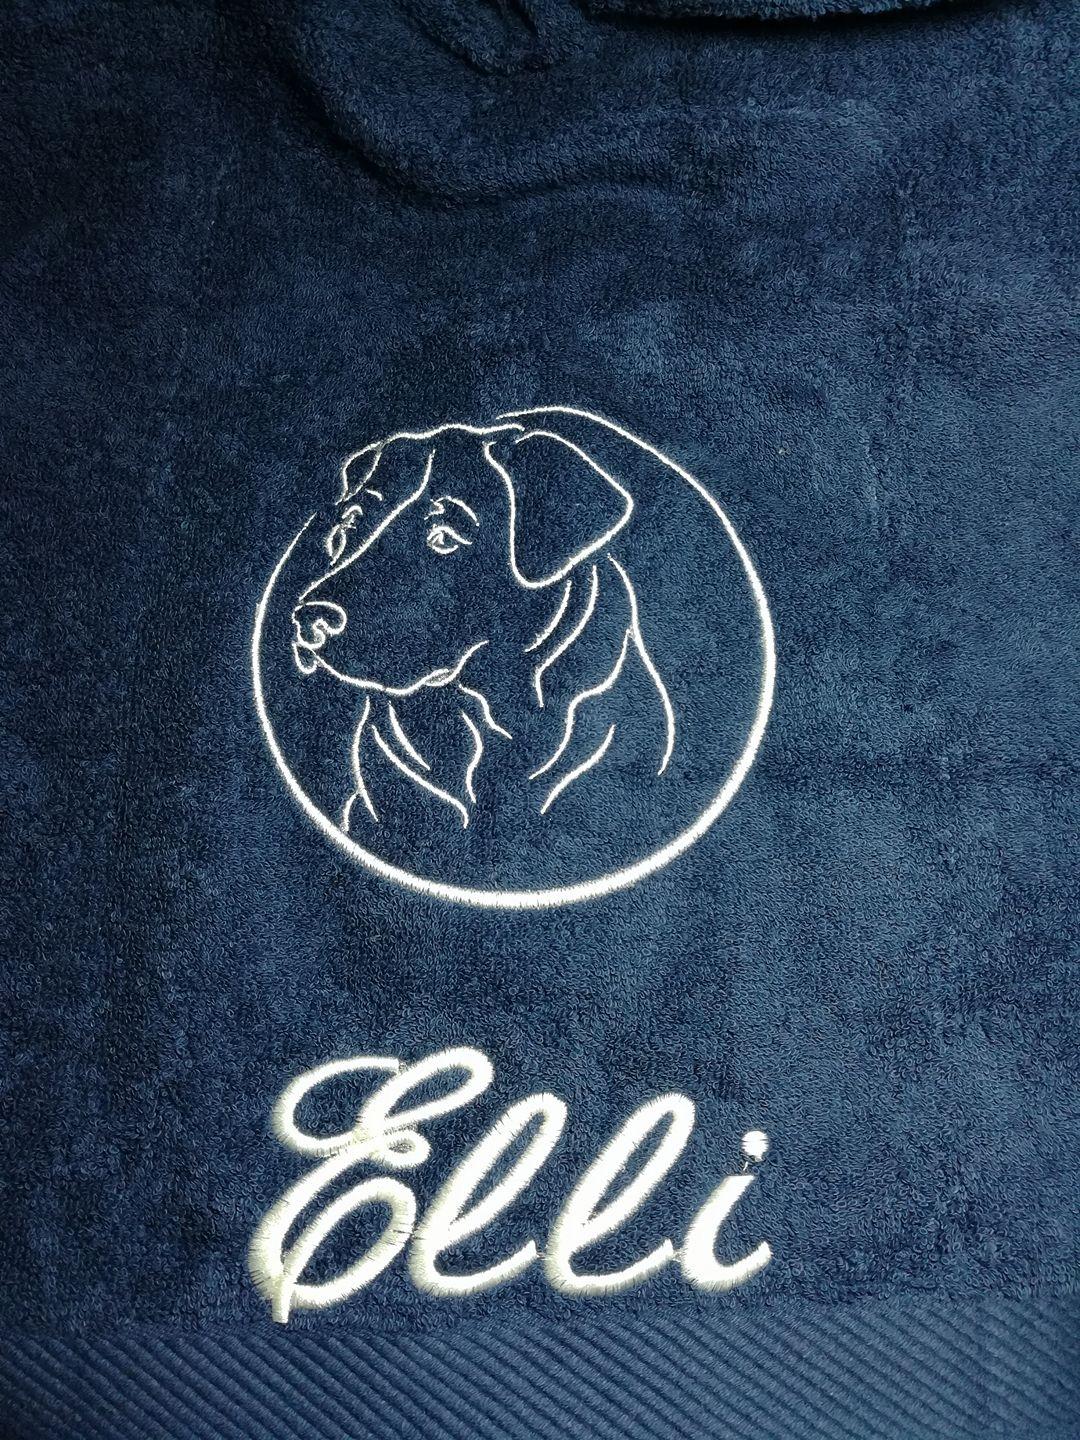 Embroidered towel with head of dog design